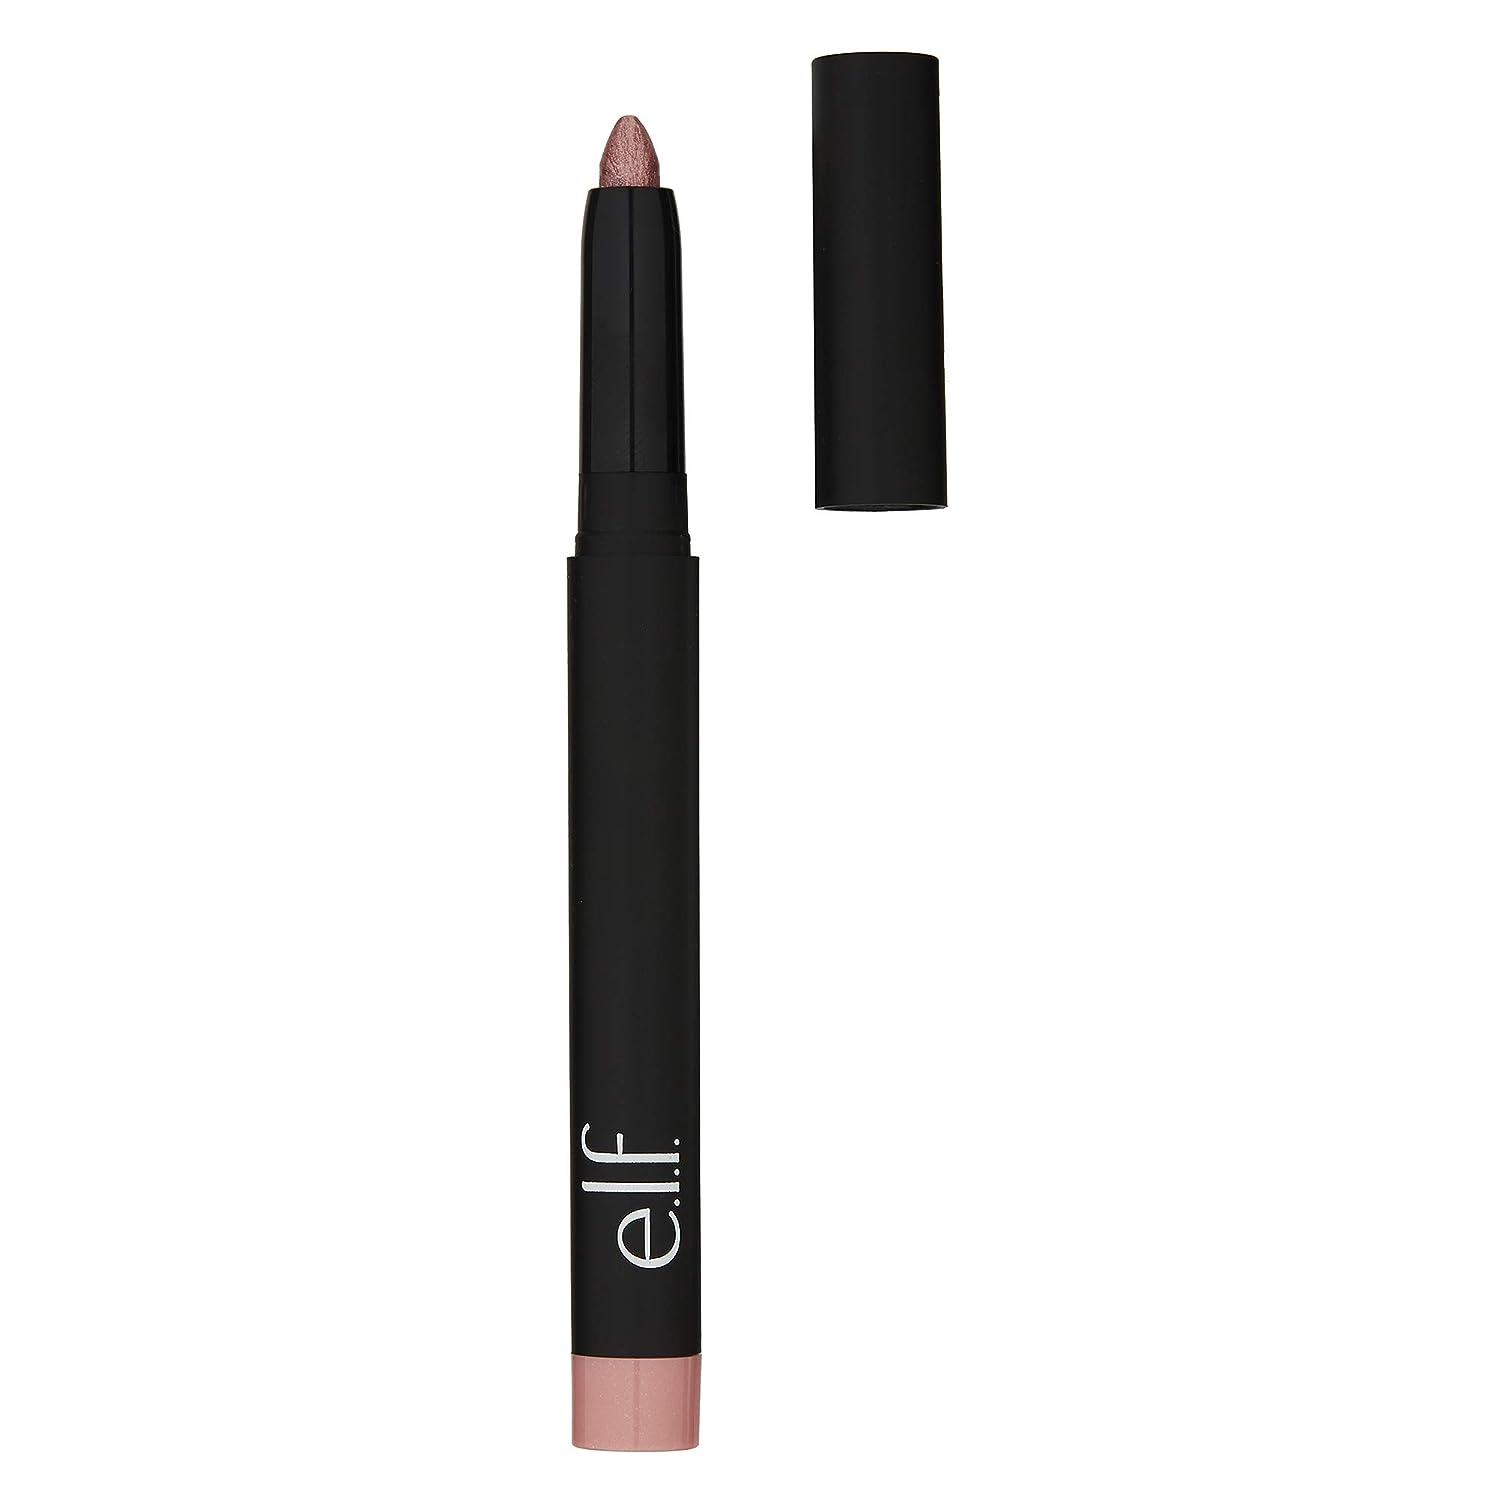 e.l.f., No Budge Shadow Stick, Smudge-Proof, Long Lasting, Creamy, Blends Effortlessly, Avoids Creasing, Rose Gold, All-Day Wear, 0.056